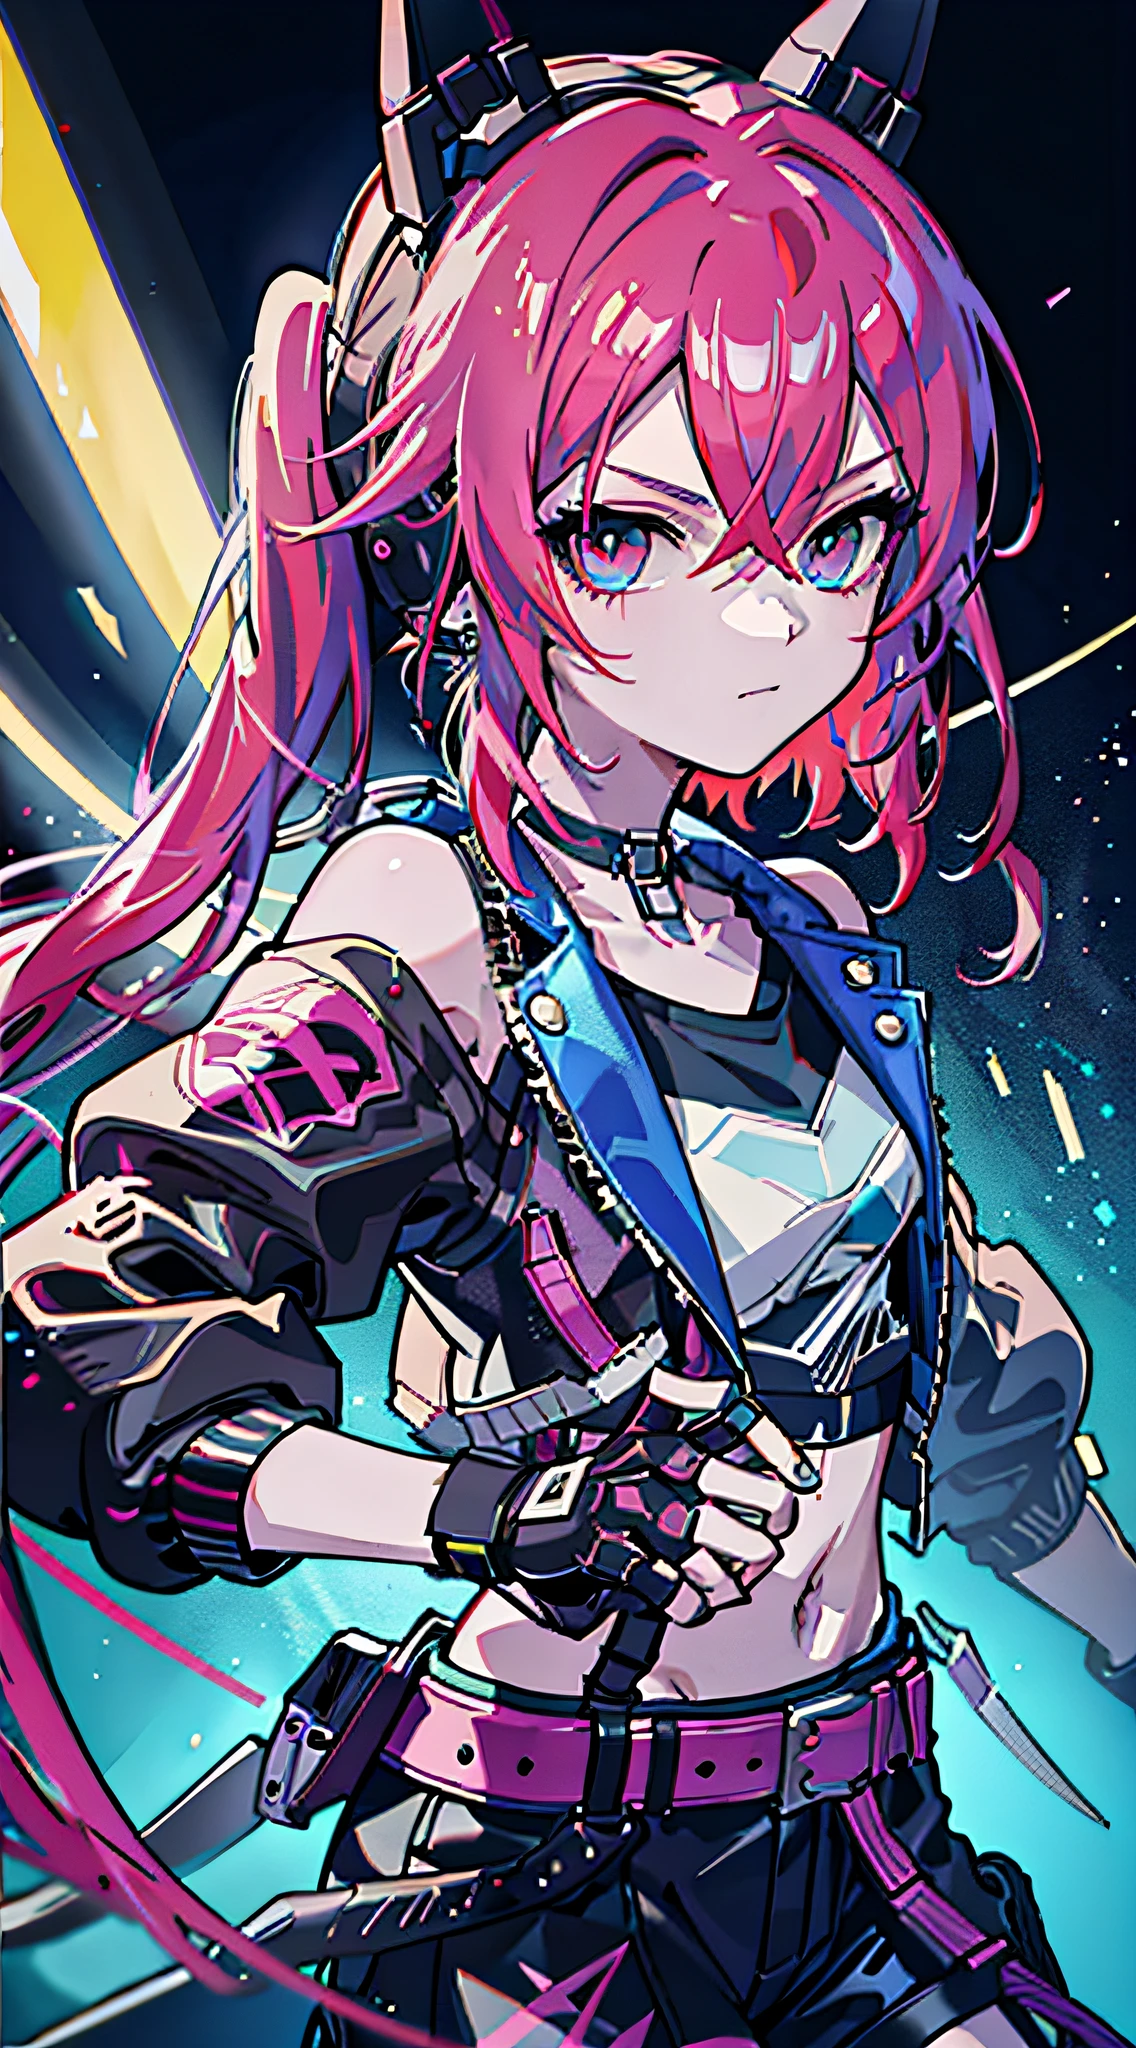 masutepiece, Best Quality, Colorful, Teenager with colorful pigtails wearing detailed leather jacket and anime t-shirt touching translucent panels, In dark voids filled with small strong light particles, Jacket from the shoulder, Front floating screen, Dramatic viewing angles, Dynamic Pose, (Close-up of face focus:1.2), Detailed headphone earrings cat with neon ears, Contrasty, Colorful hair, color combination, Bright, Red hair, Blue hair See all Depth of field, High resolution, high intricate detailed, Dramatic shadows, Global Illumination